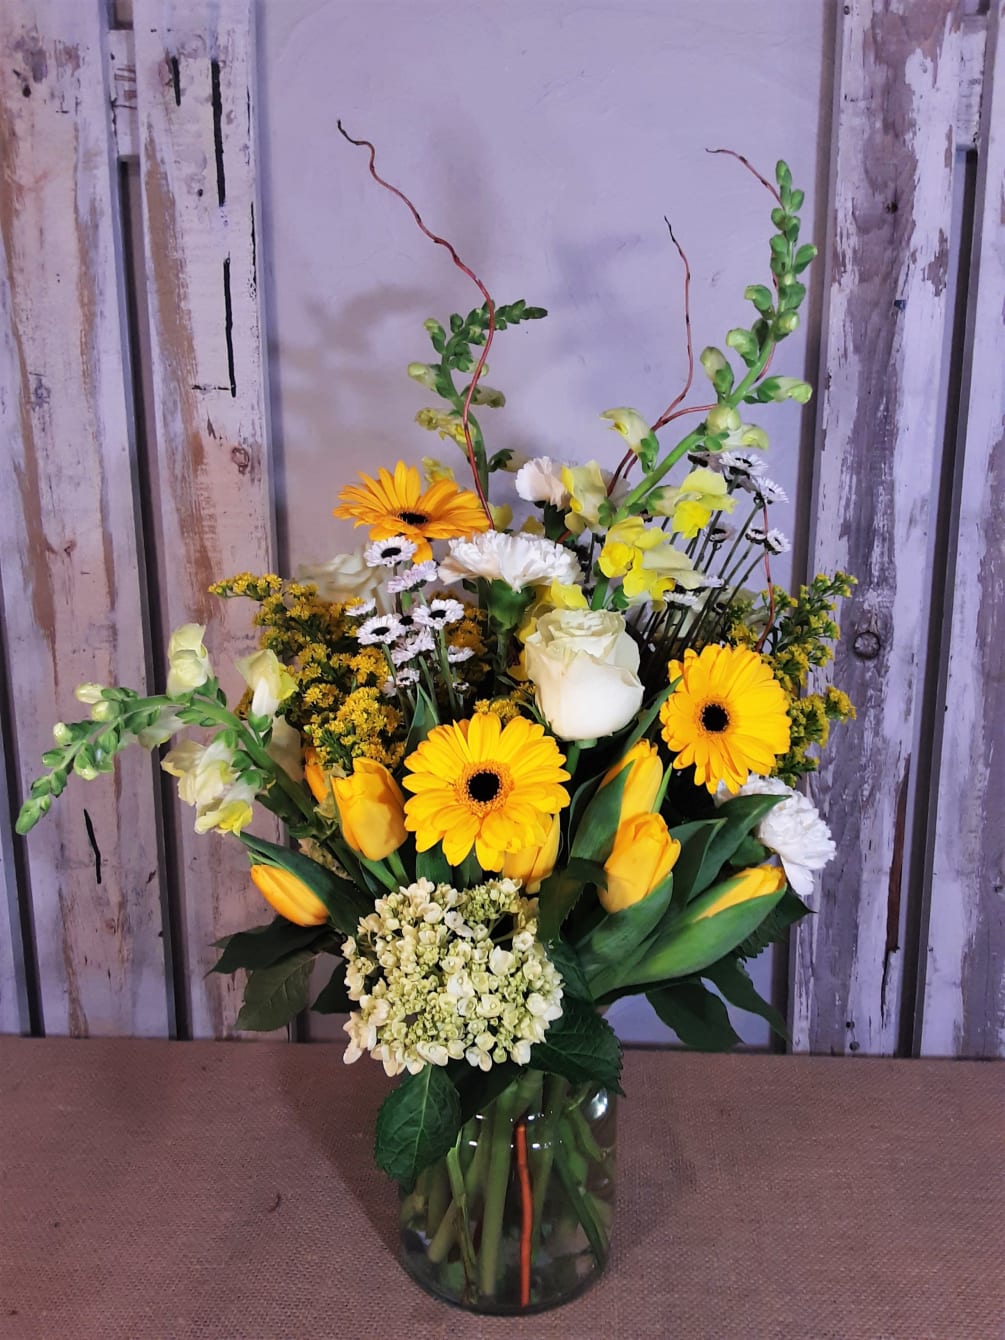 Brighten any day with this lovely arrangement is sunny shades of yellow